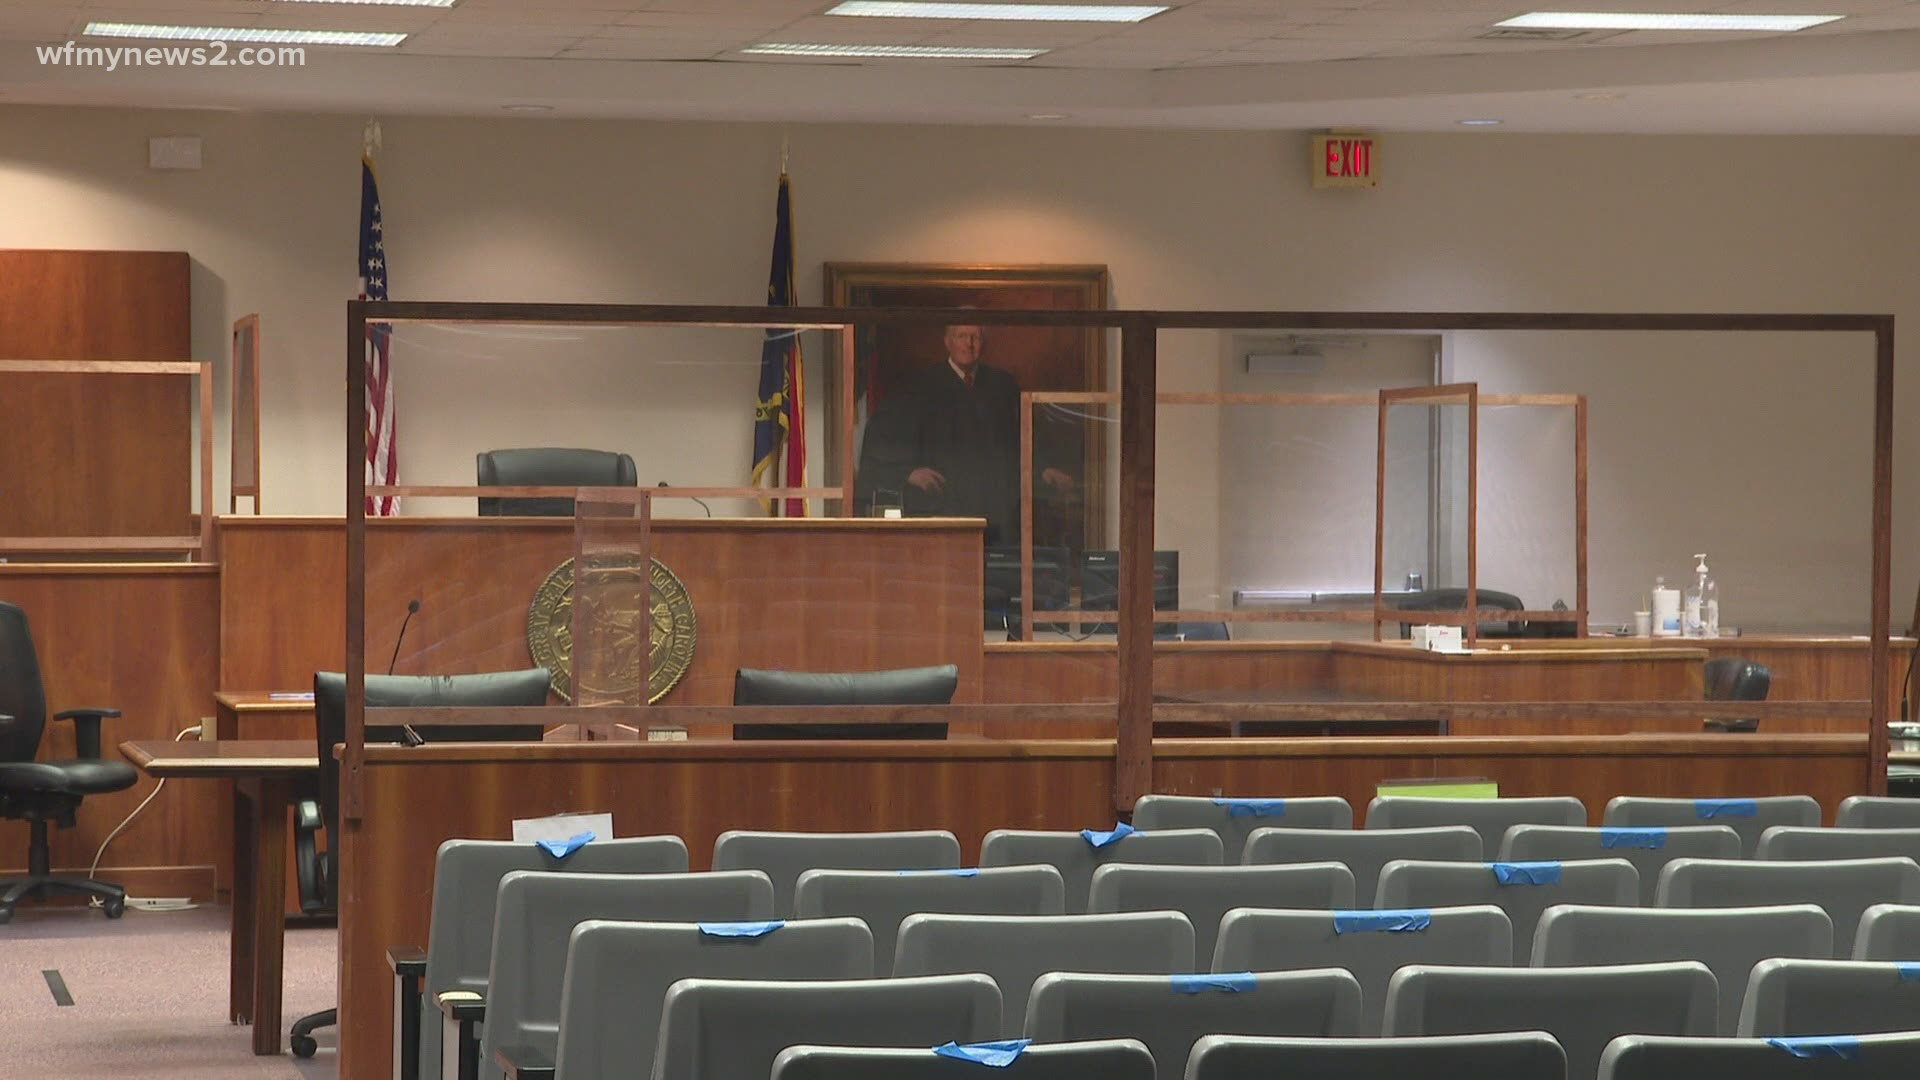 Guilford County courts backlog worse after pandemic wfmynews2 com